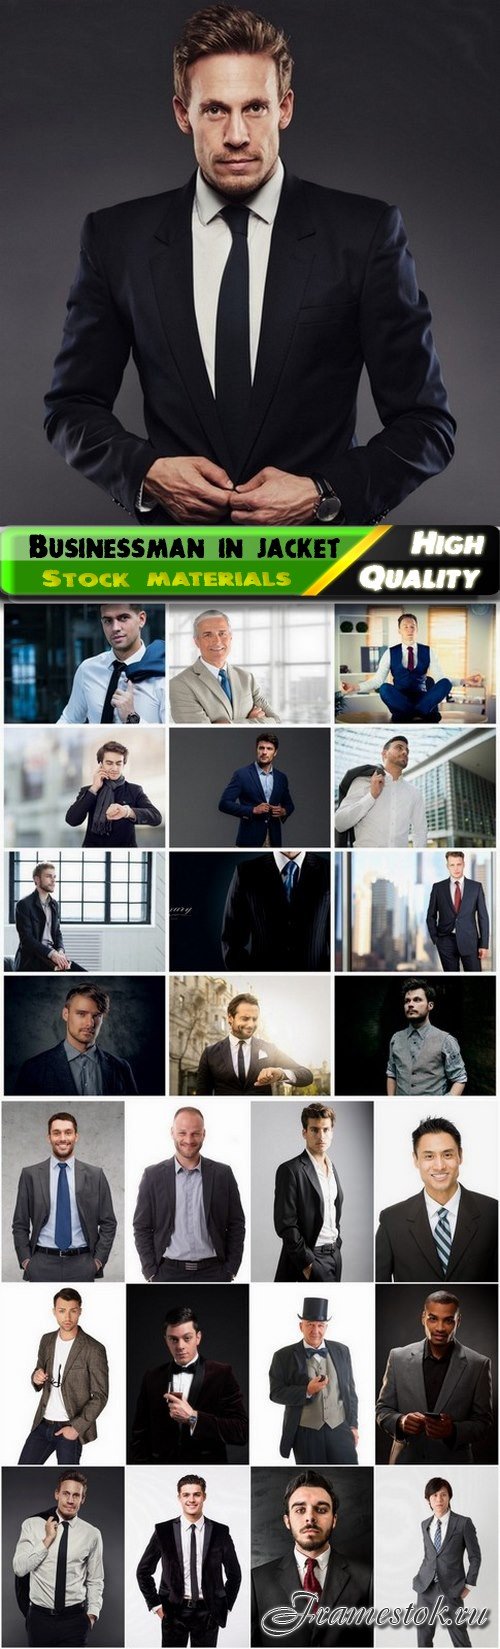 Stylish young and adult businessman in fashionable jacket - 25 HQ Jpg